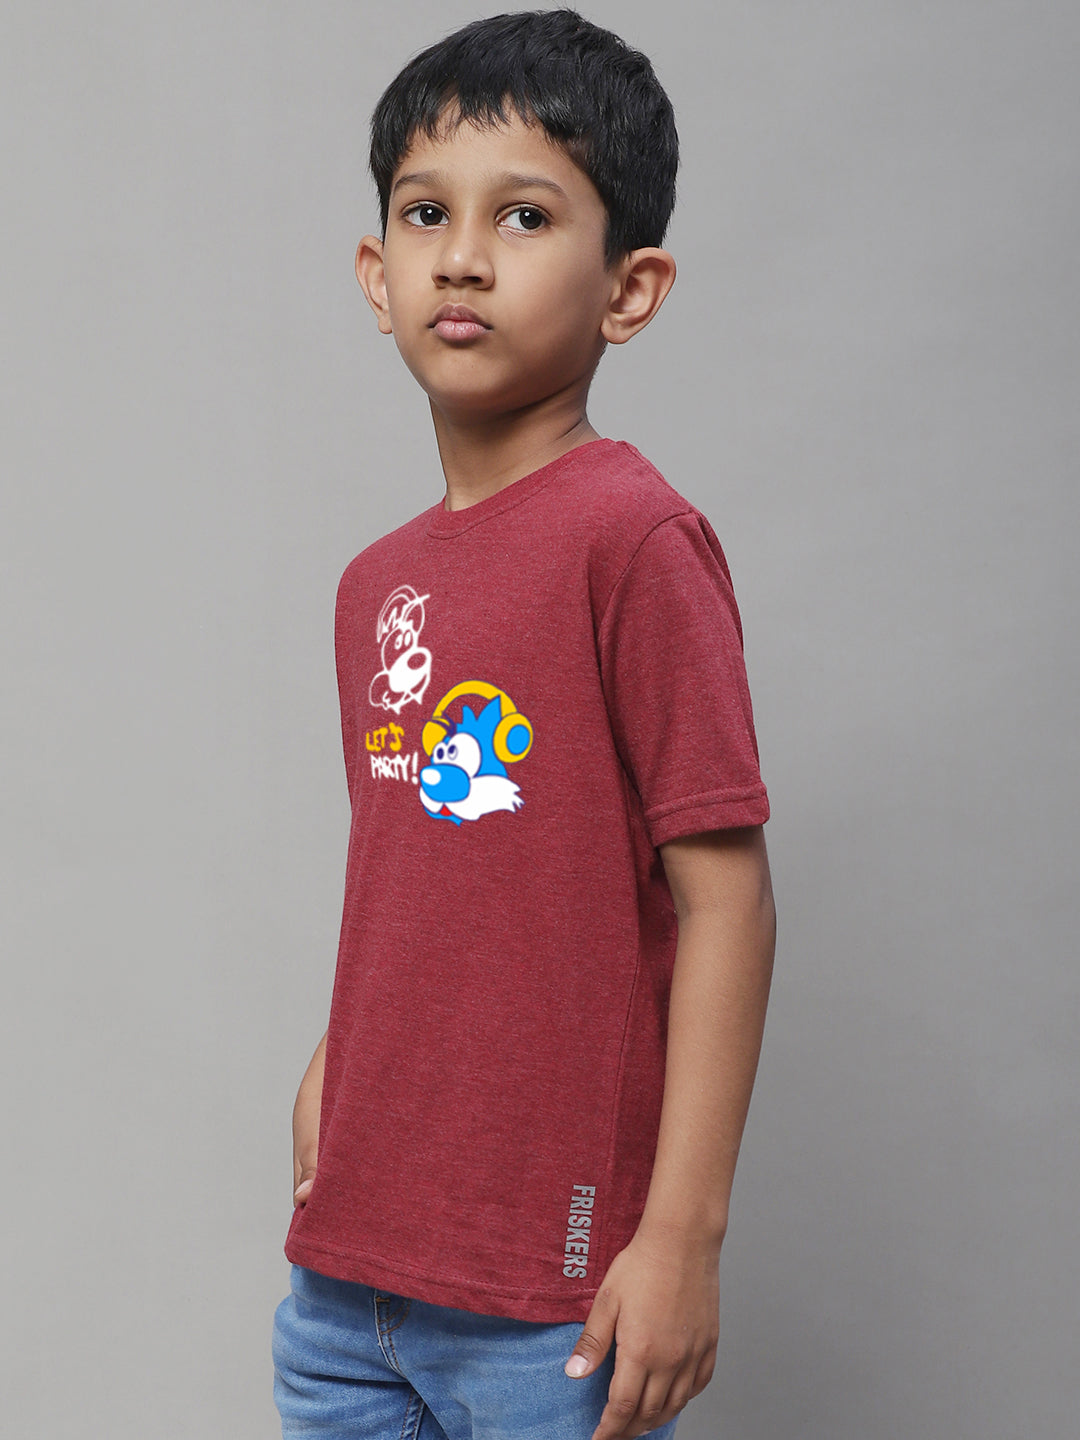 Boys Lets Party Regular Fit Printed T-Shirt - Friskers